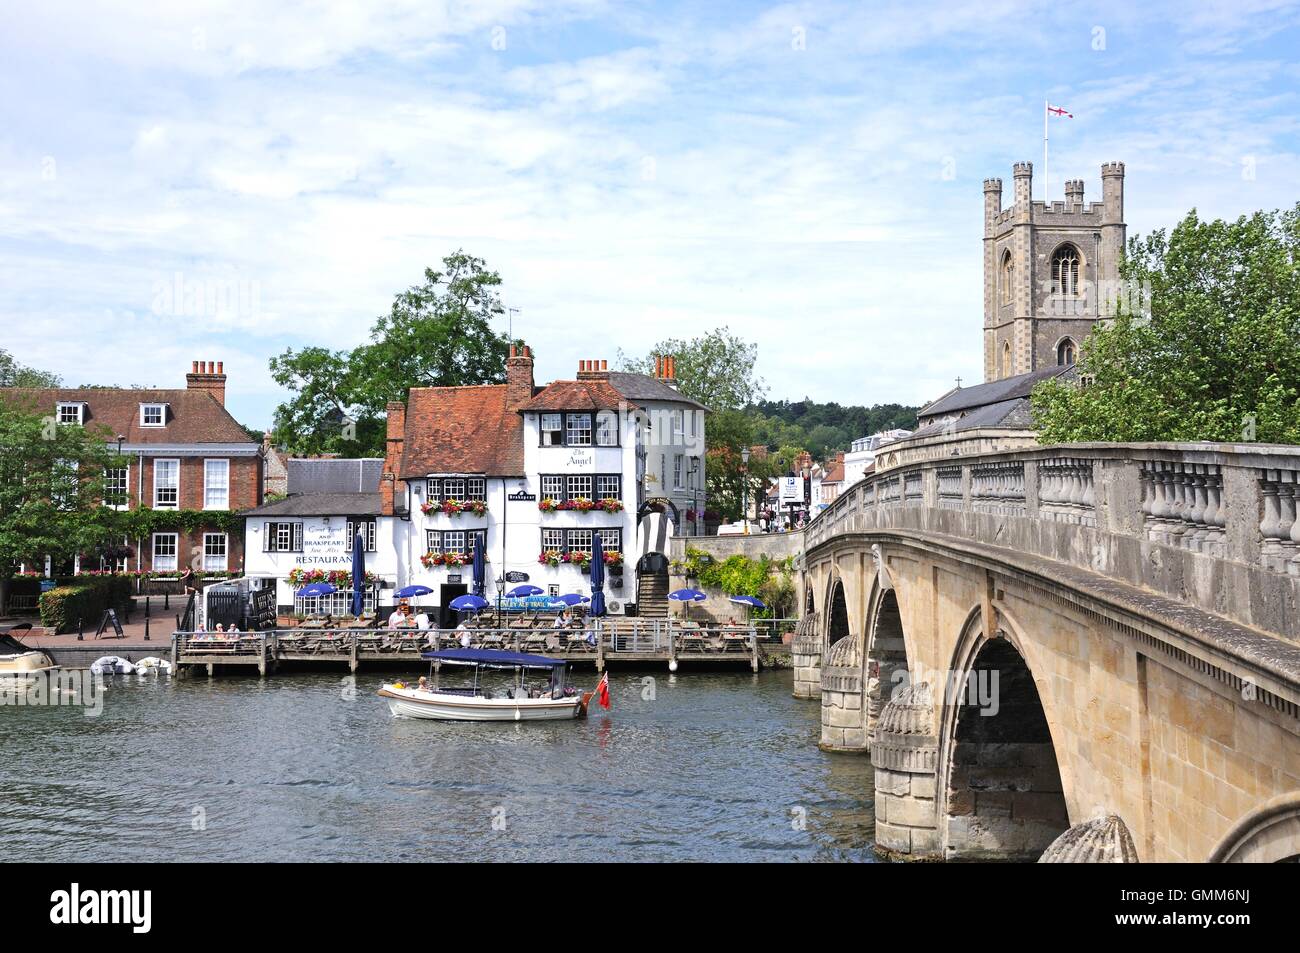 View across the River Thames towards The Angel Pub, Henley-on-Thames, Oxfordshire, England, UK, Western Europe. Stock Photo